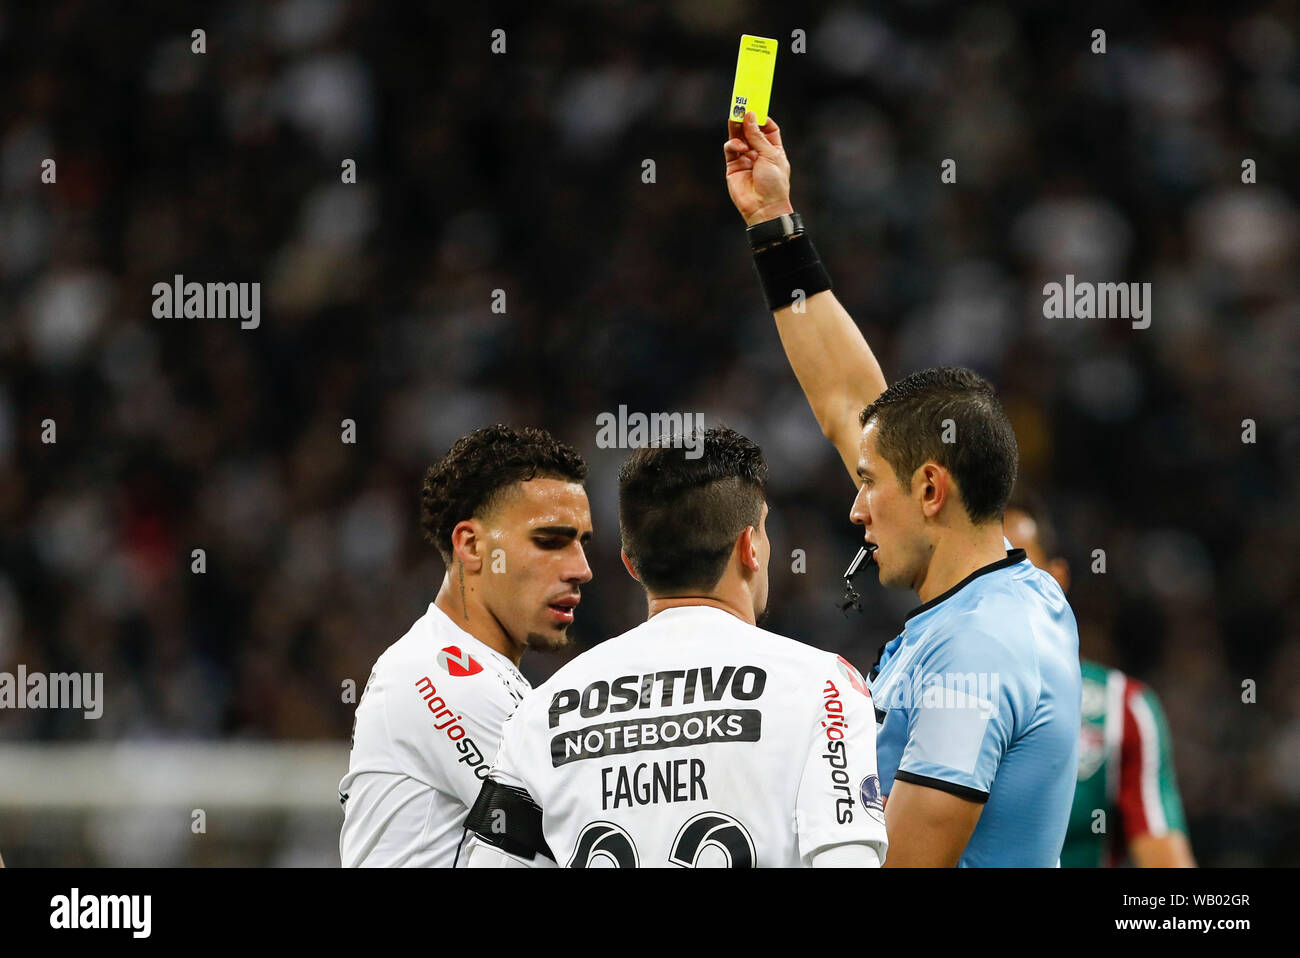 SÃO PAULO, SP - 22.08.2019: CORINTHIANS X FLUMINENSE - Referee Andres Rojas (COL) shows Gabriel a yellow card during a match between Corinthians x Fluminense held at Arena Corinthians, East Zone of Sao Paulo, SP. The match is the first valid for the quarterfinals of the 2019 South American Cup. (Photo: Ricardo Moreira/Fotoarena) Stock Photo